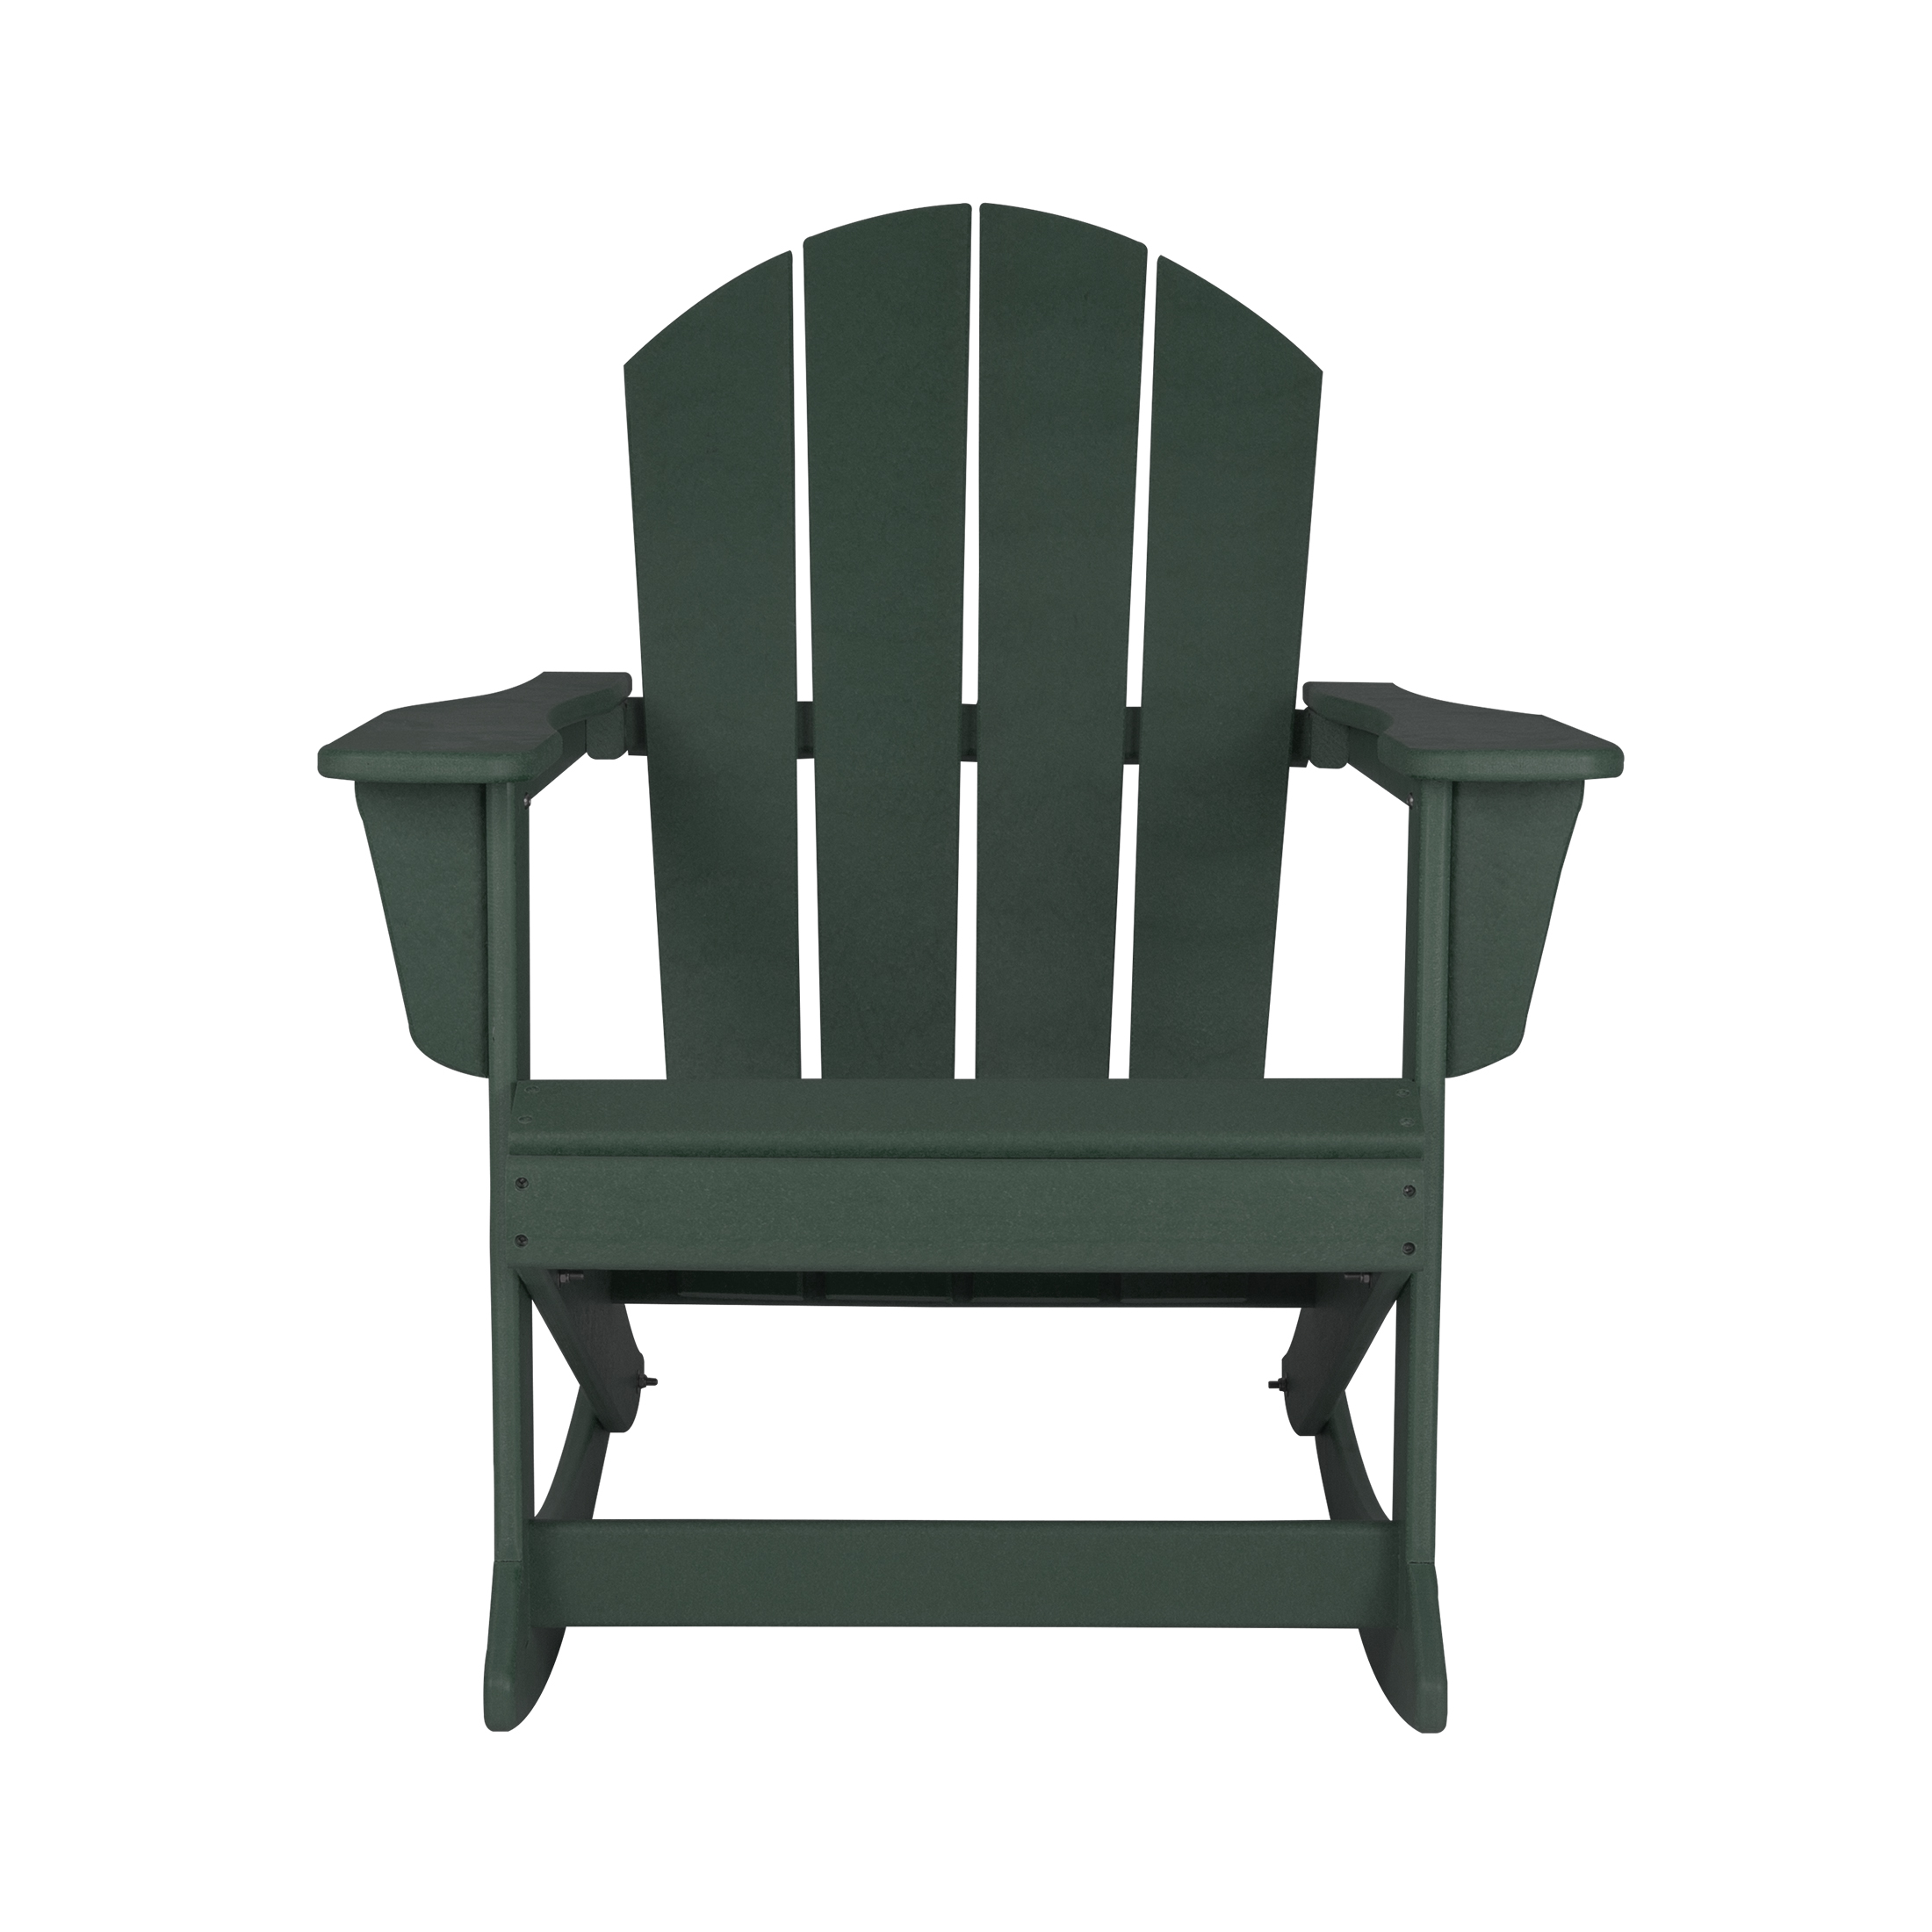 GARDEN Plastic Adirondack Rocking Chair for Outdoor Patio Porch Seating, Dark Green - image 5 of 7